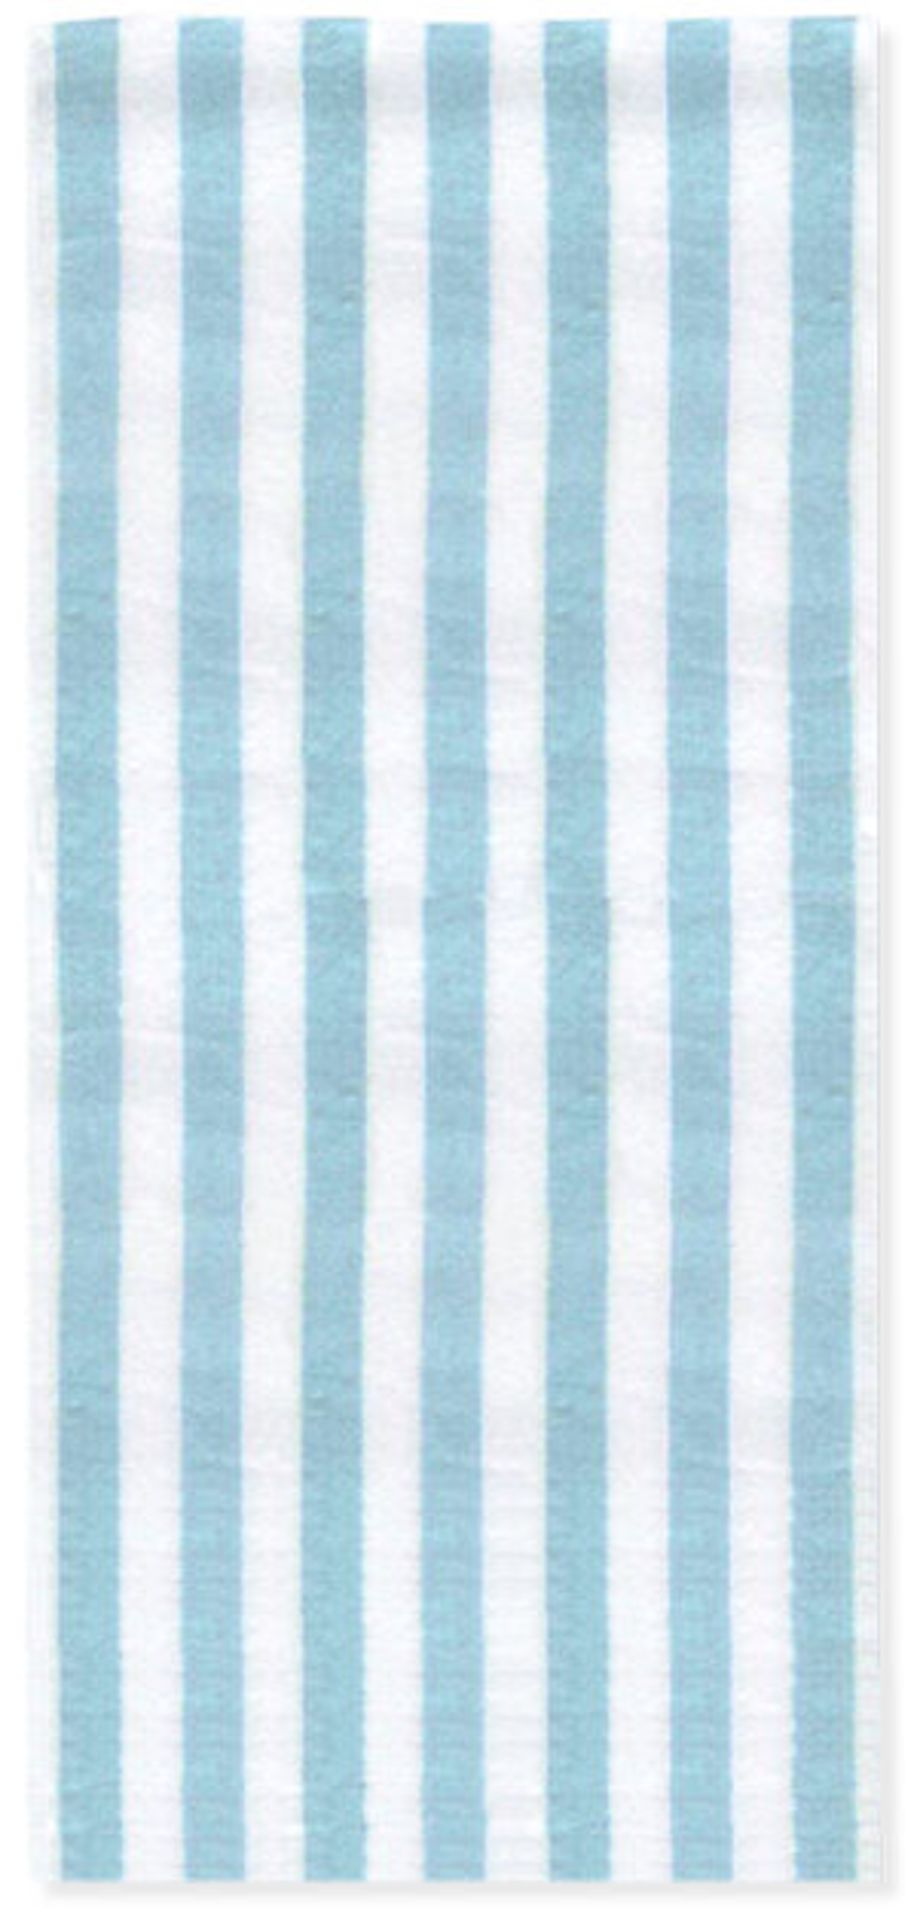 V *TRADE QTY* Brand New Hotel Quality Blue and White Striped Bath Sheet/Pool Size Towel - image